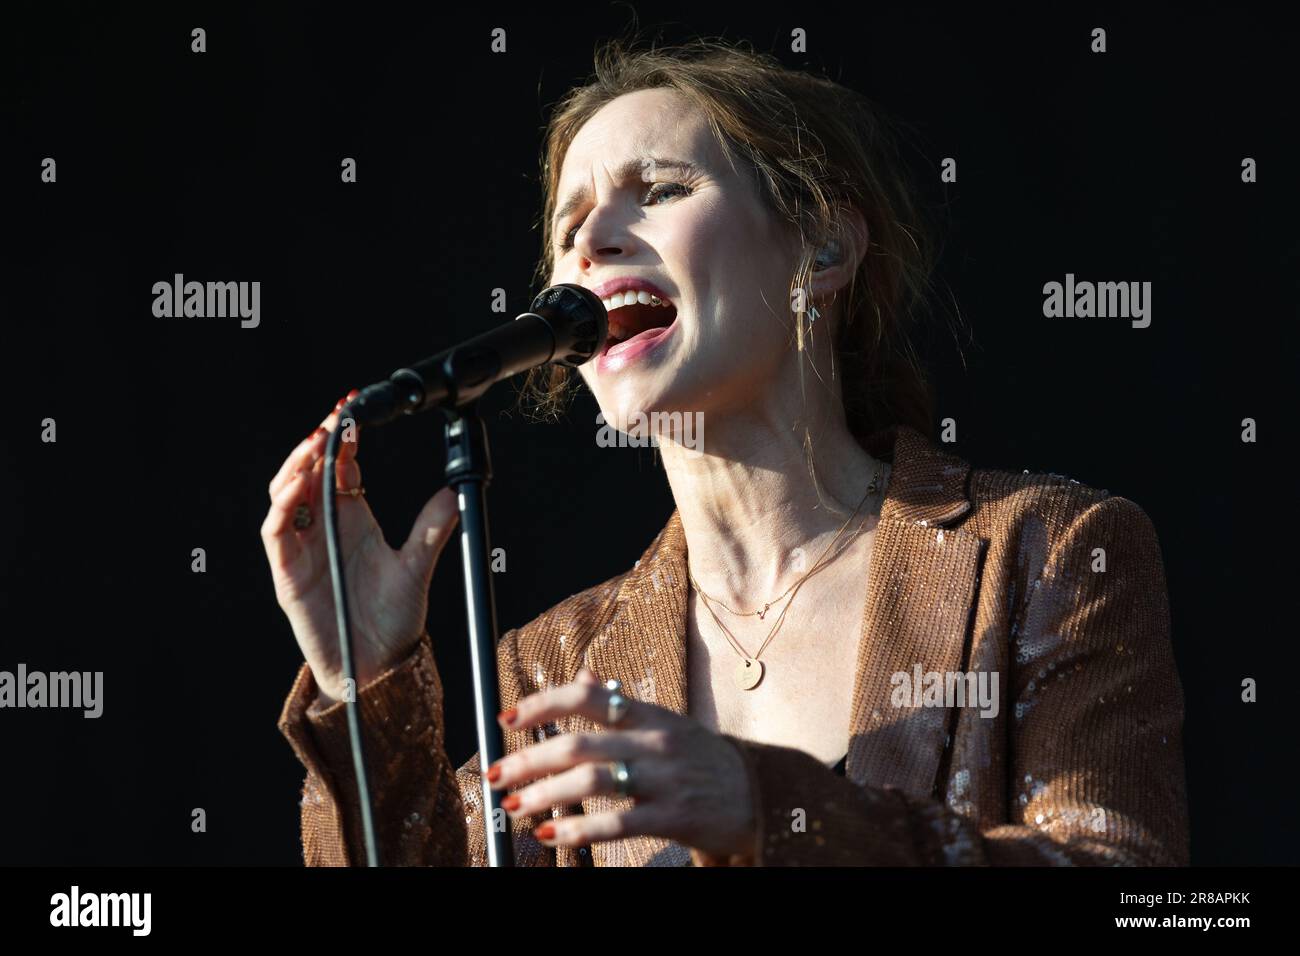 Kvaerndrup, Denmark. 09th, June 2023. The Swedish rock band The Cardigans  performs a live concert during the Danish music festival Heartland Festival  2023. Here singer Nina Persson is seen live on stage. (